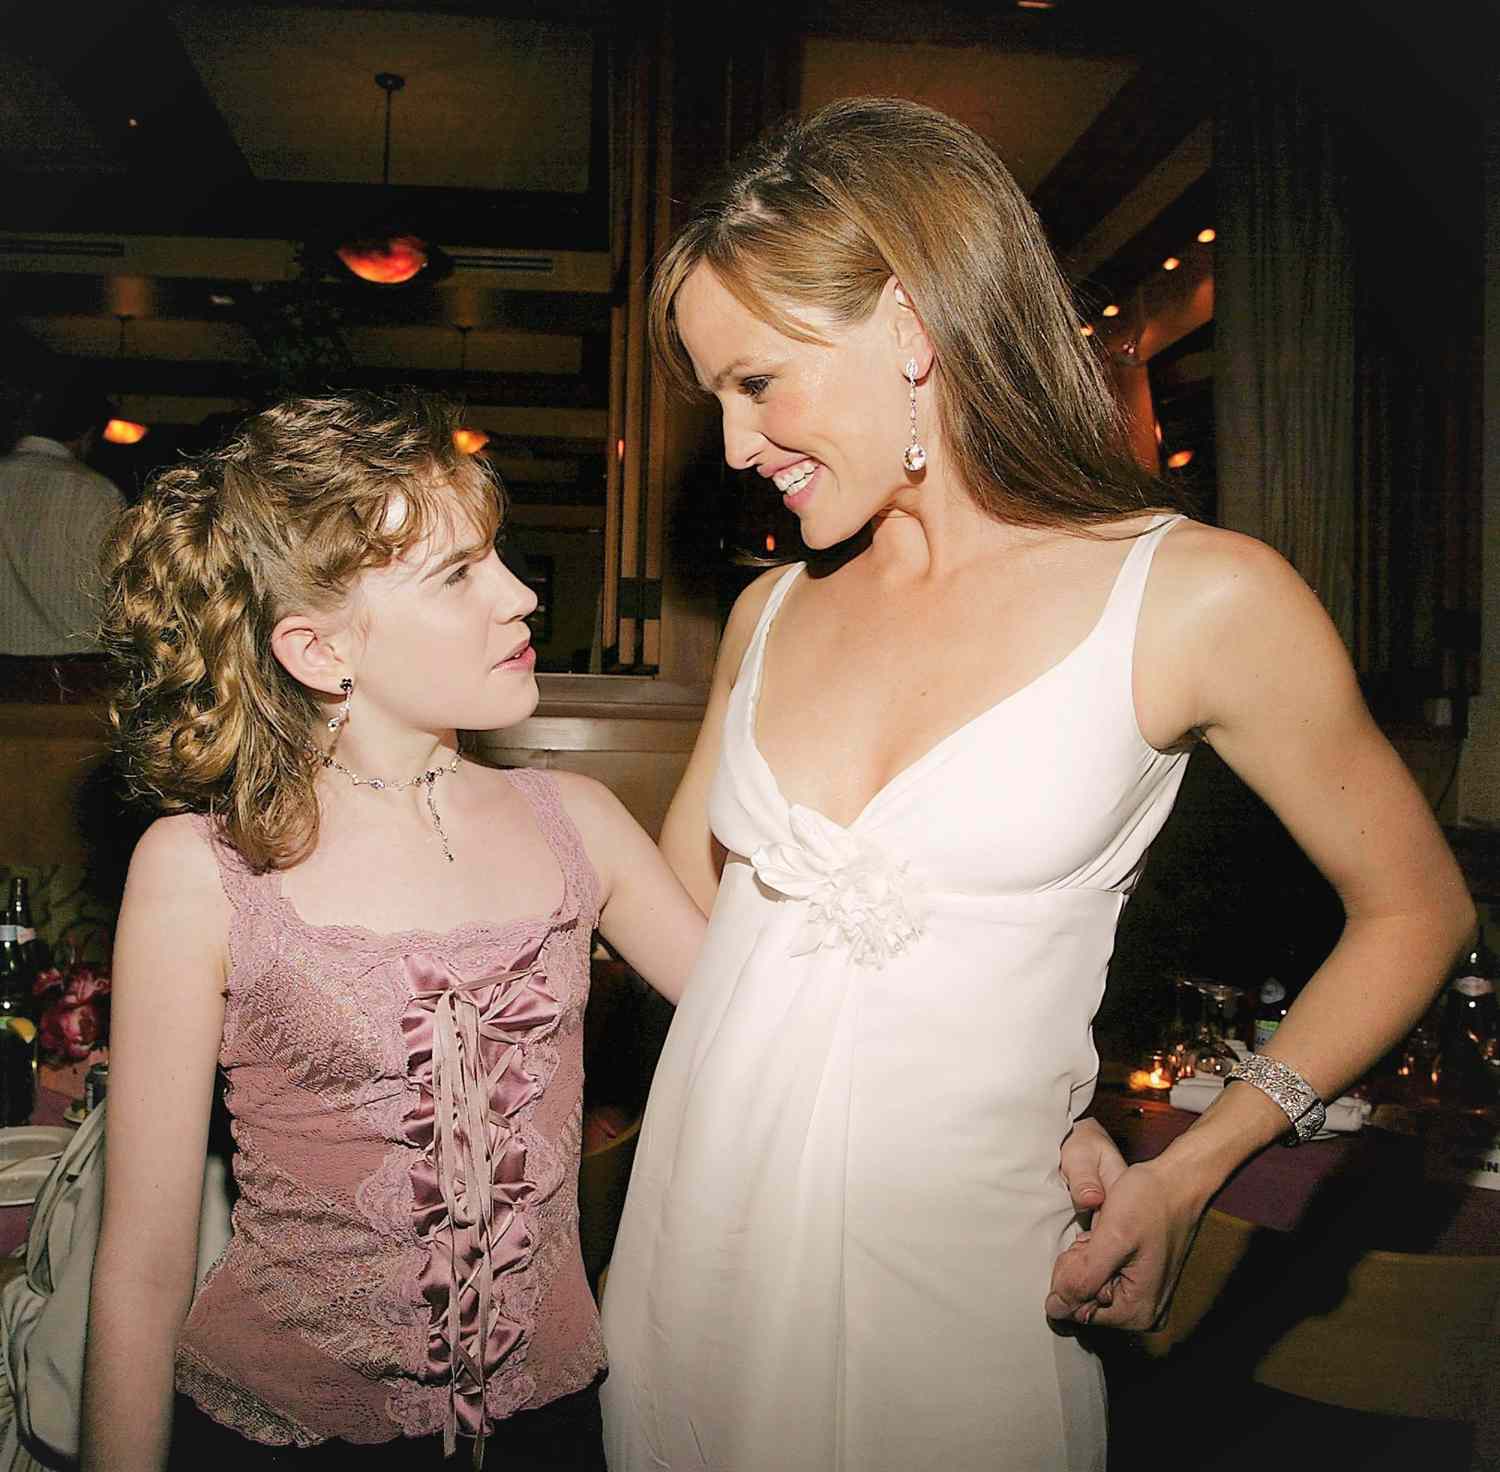 Christa B. Allen and Jennifer Garner at the "13 Going On 30" After Party in 2004